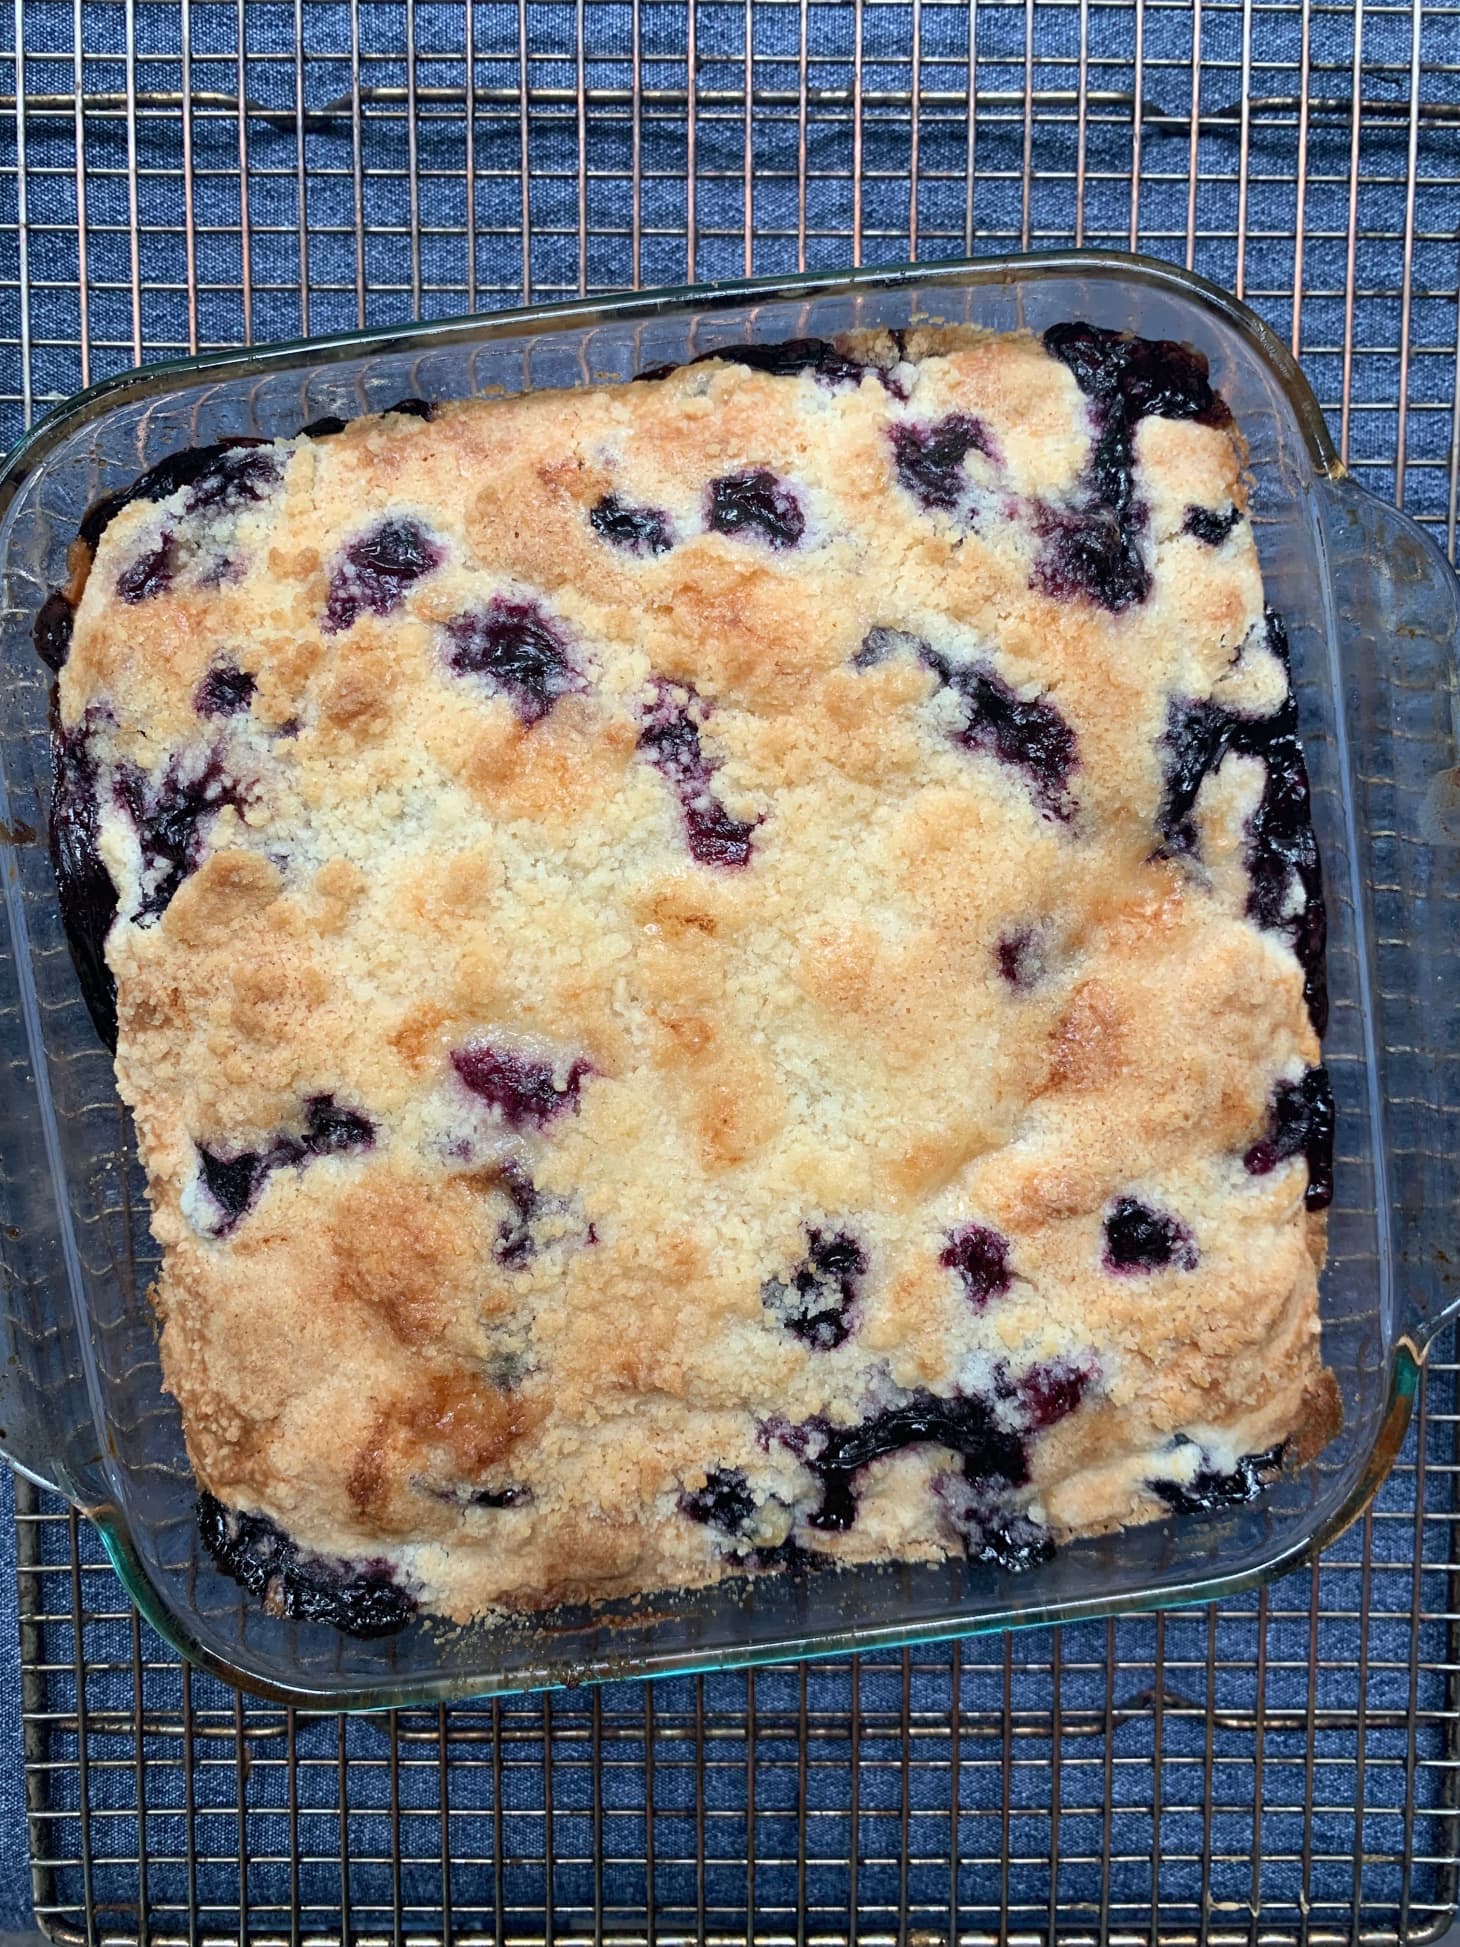 Recipe Review: Alton Brown's Blueberry Buckle | Kitchn